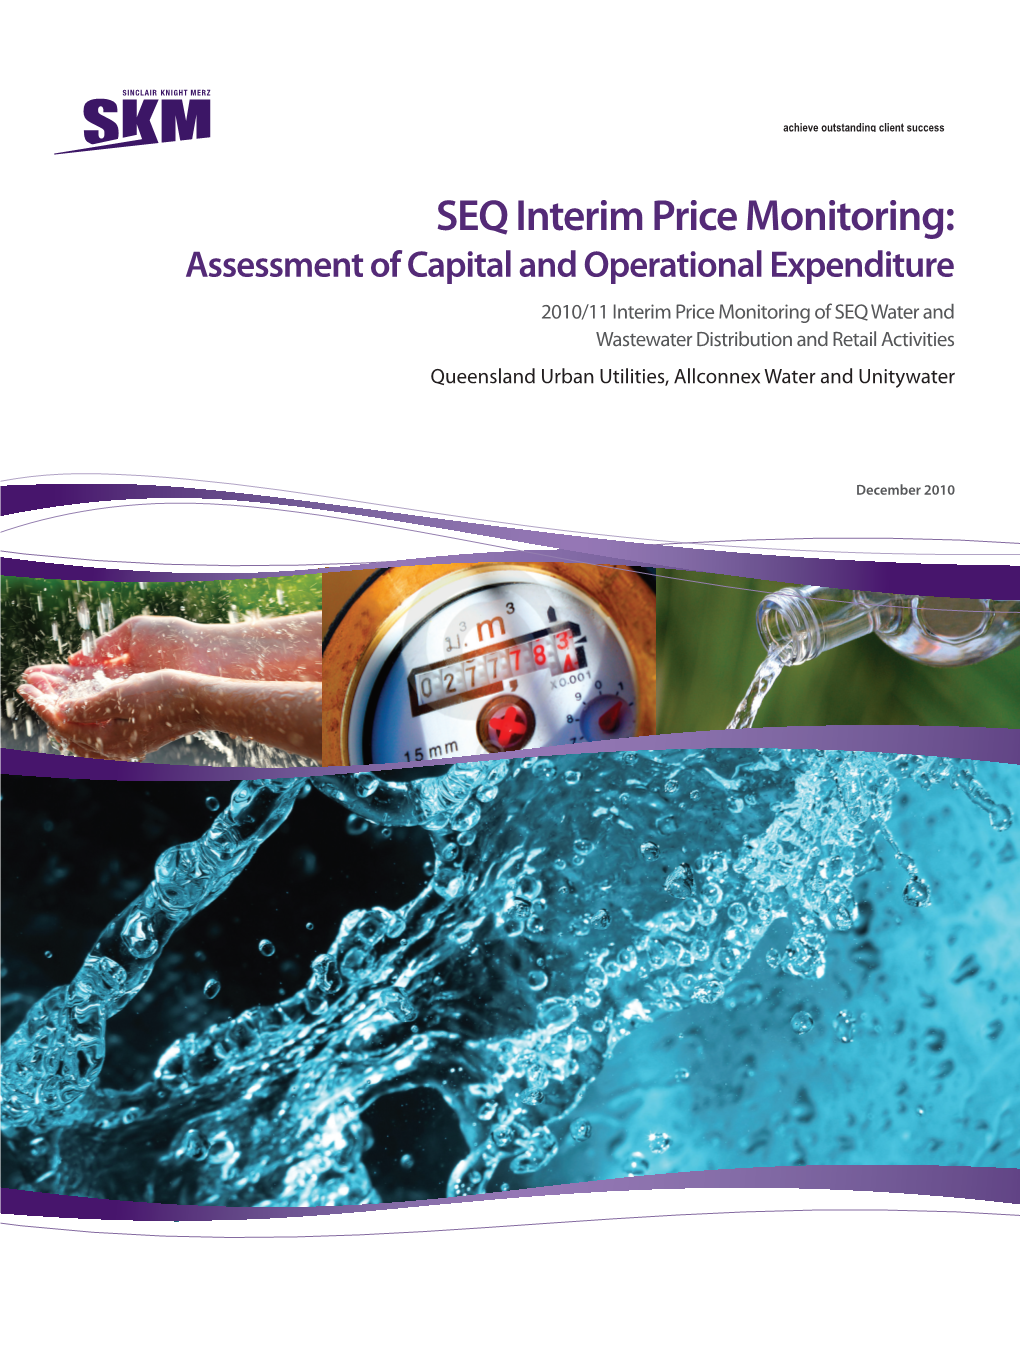 SEQ Interim Price Monitoring: Assessment of Capital and Operational Expenditure